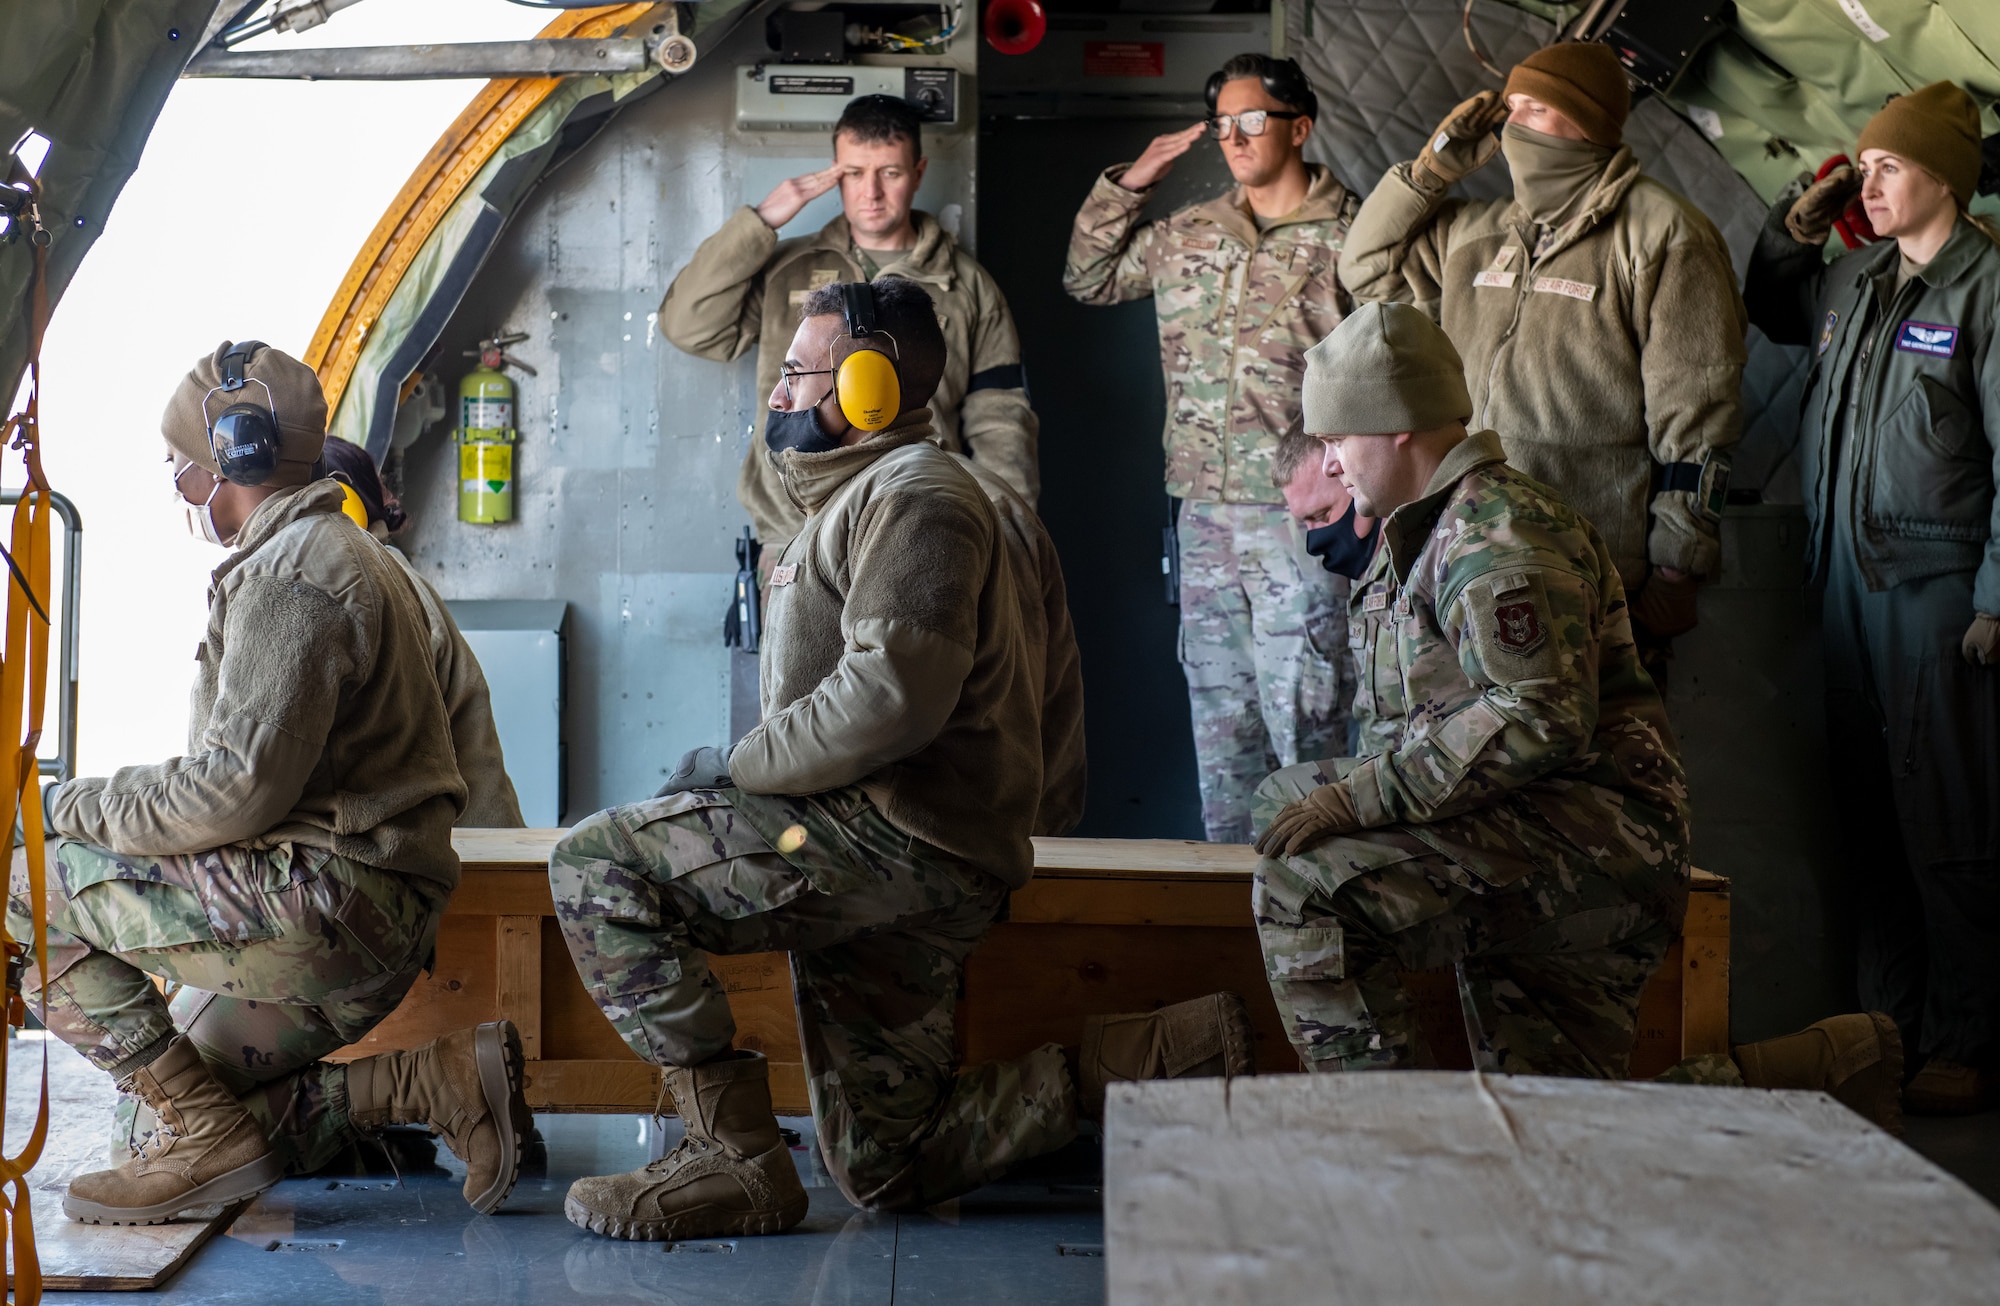 Airmen prepare to lift an empty casket box during a cargo loading exercise Feb. 5, 2022 at Hill Air Force Base, Utah